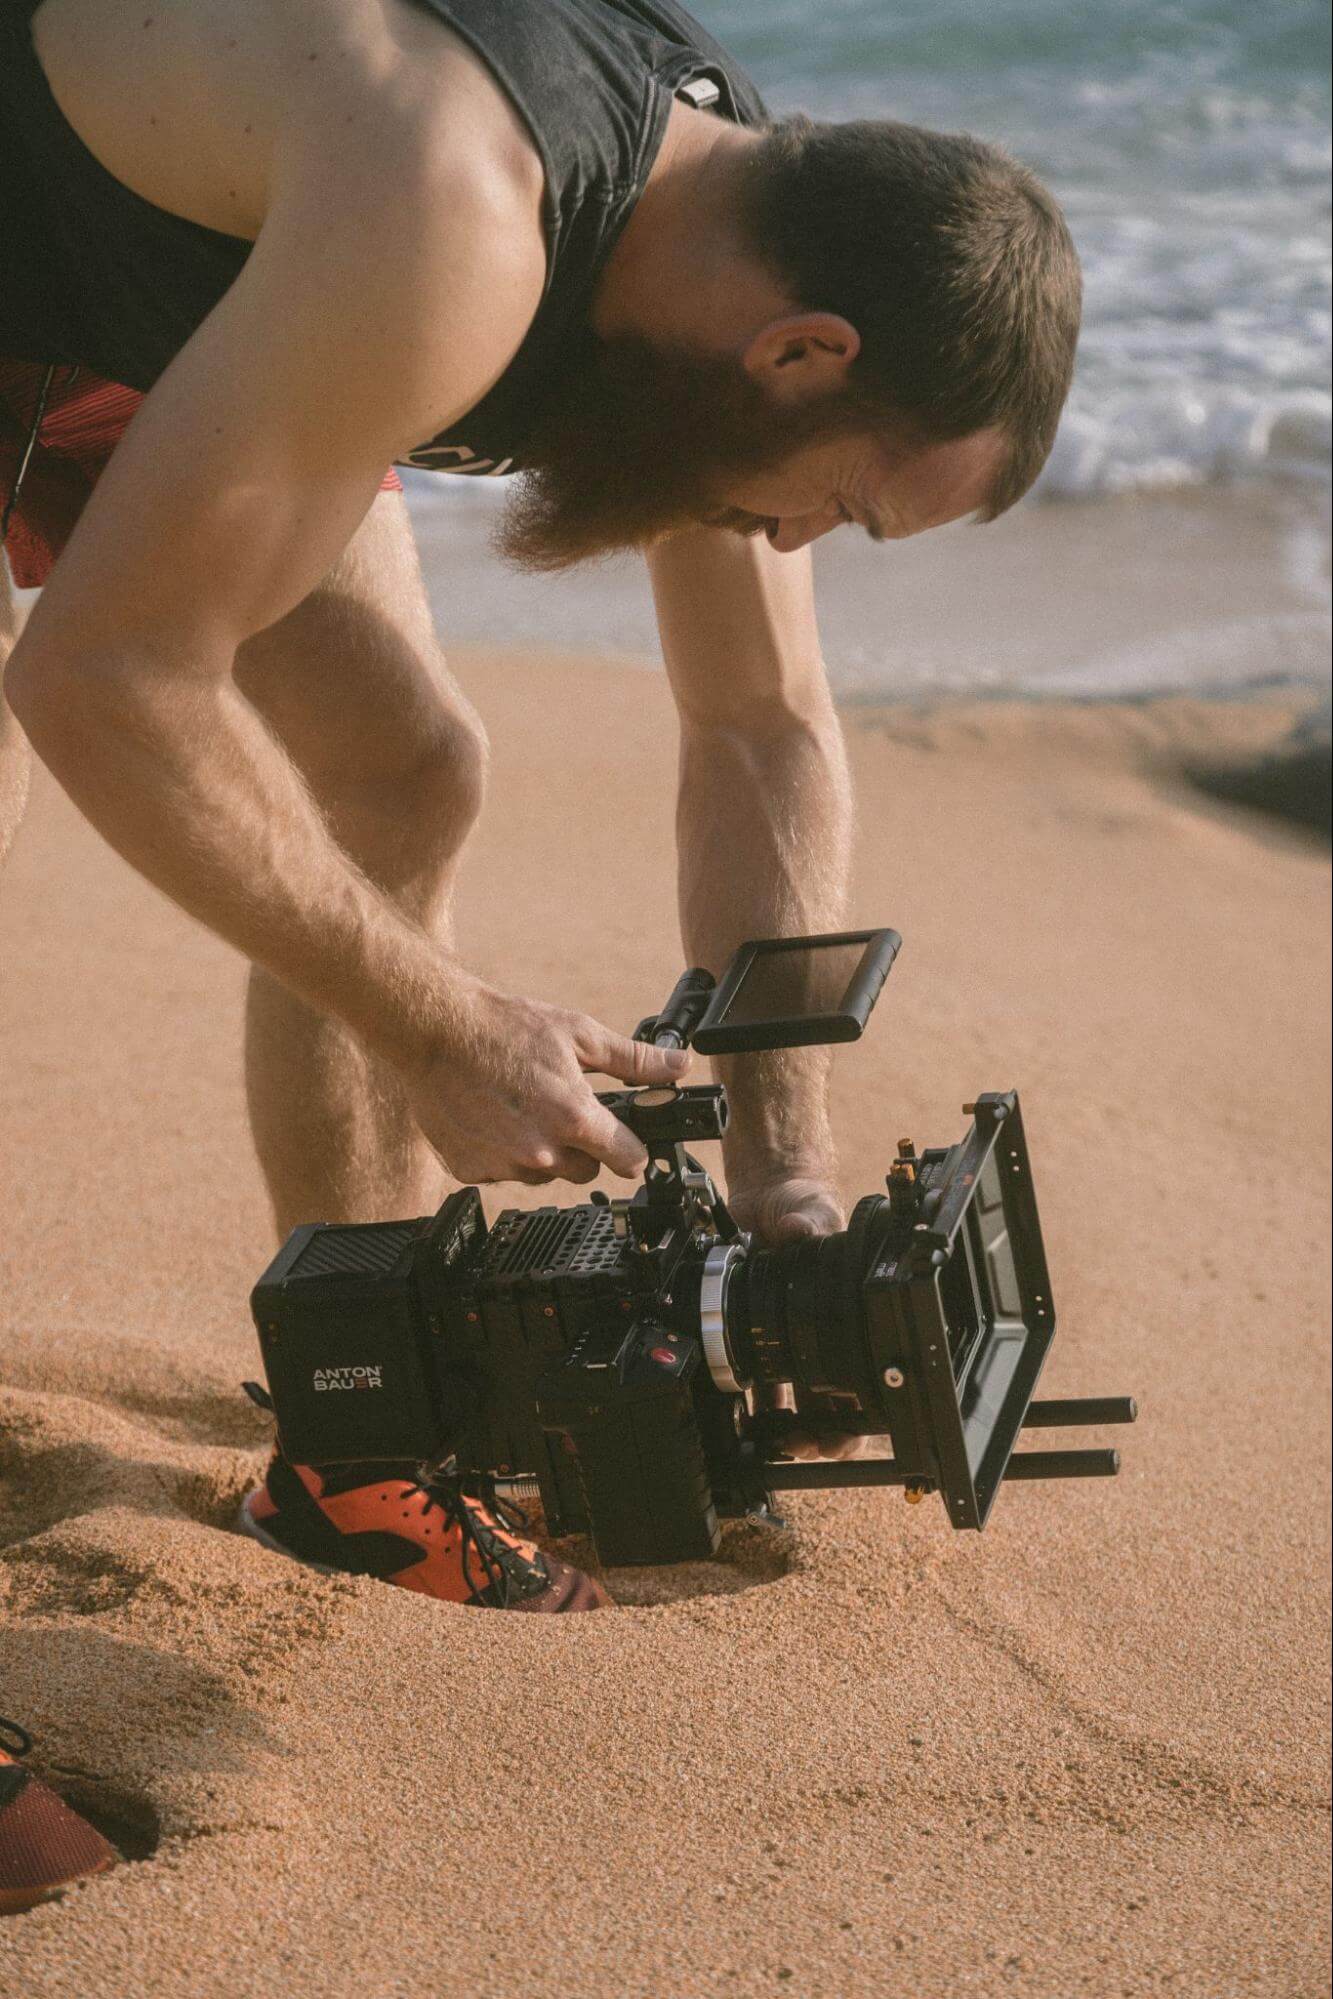 Man checking his camera on a beach after filming